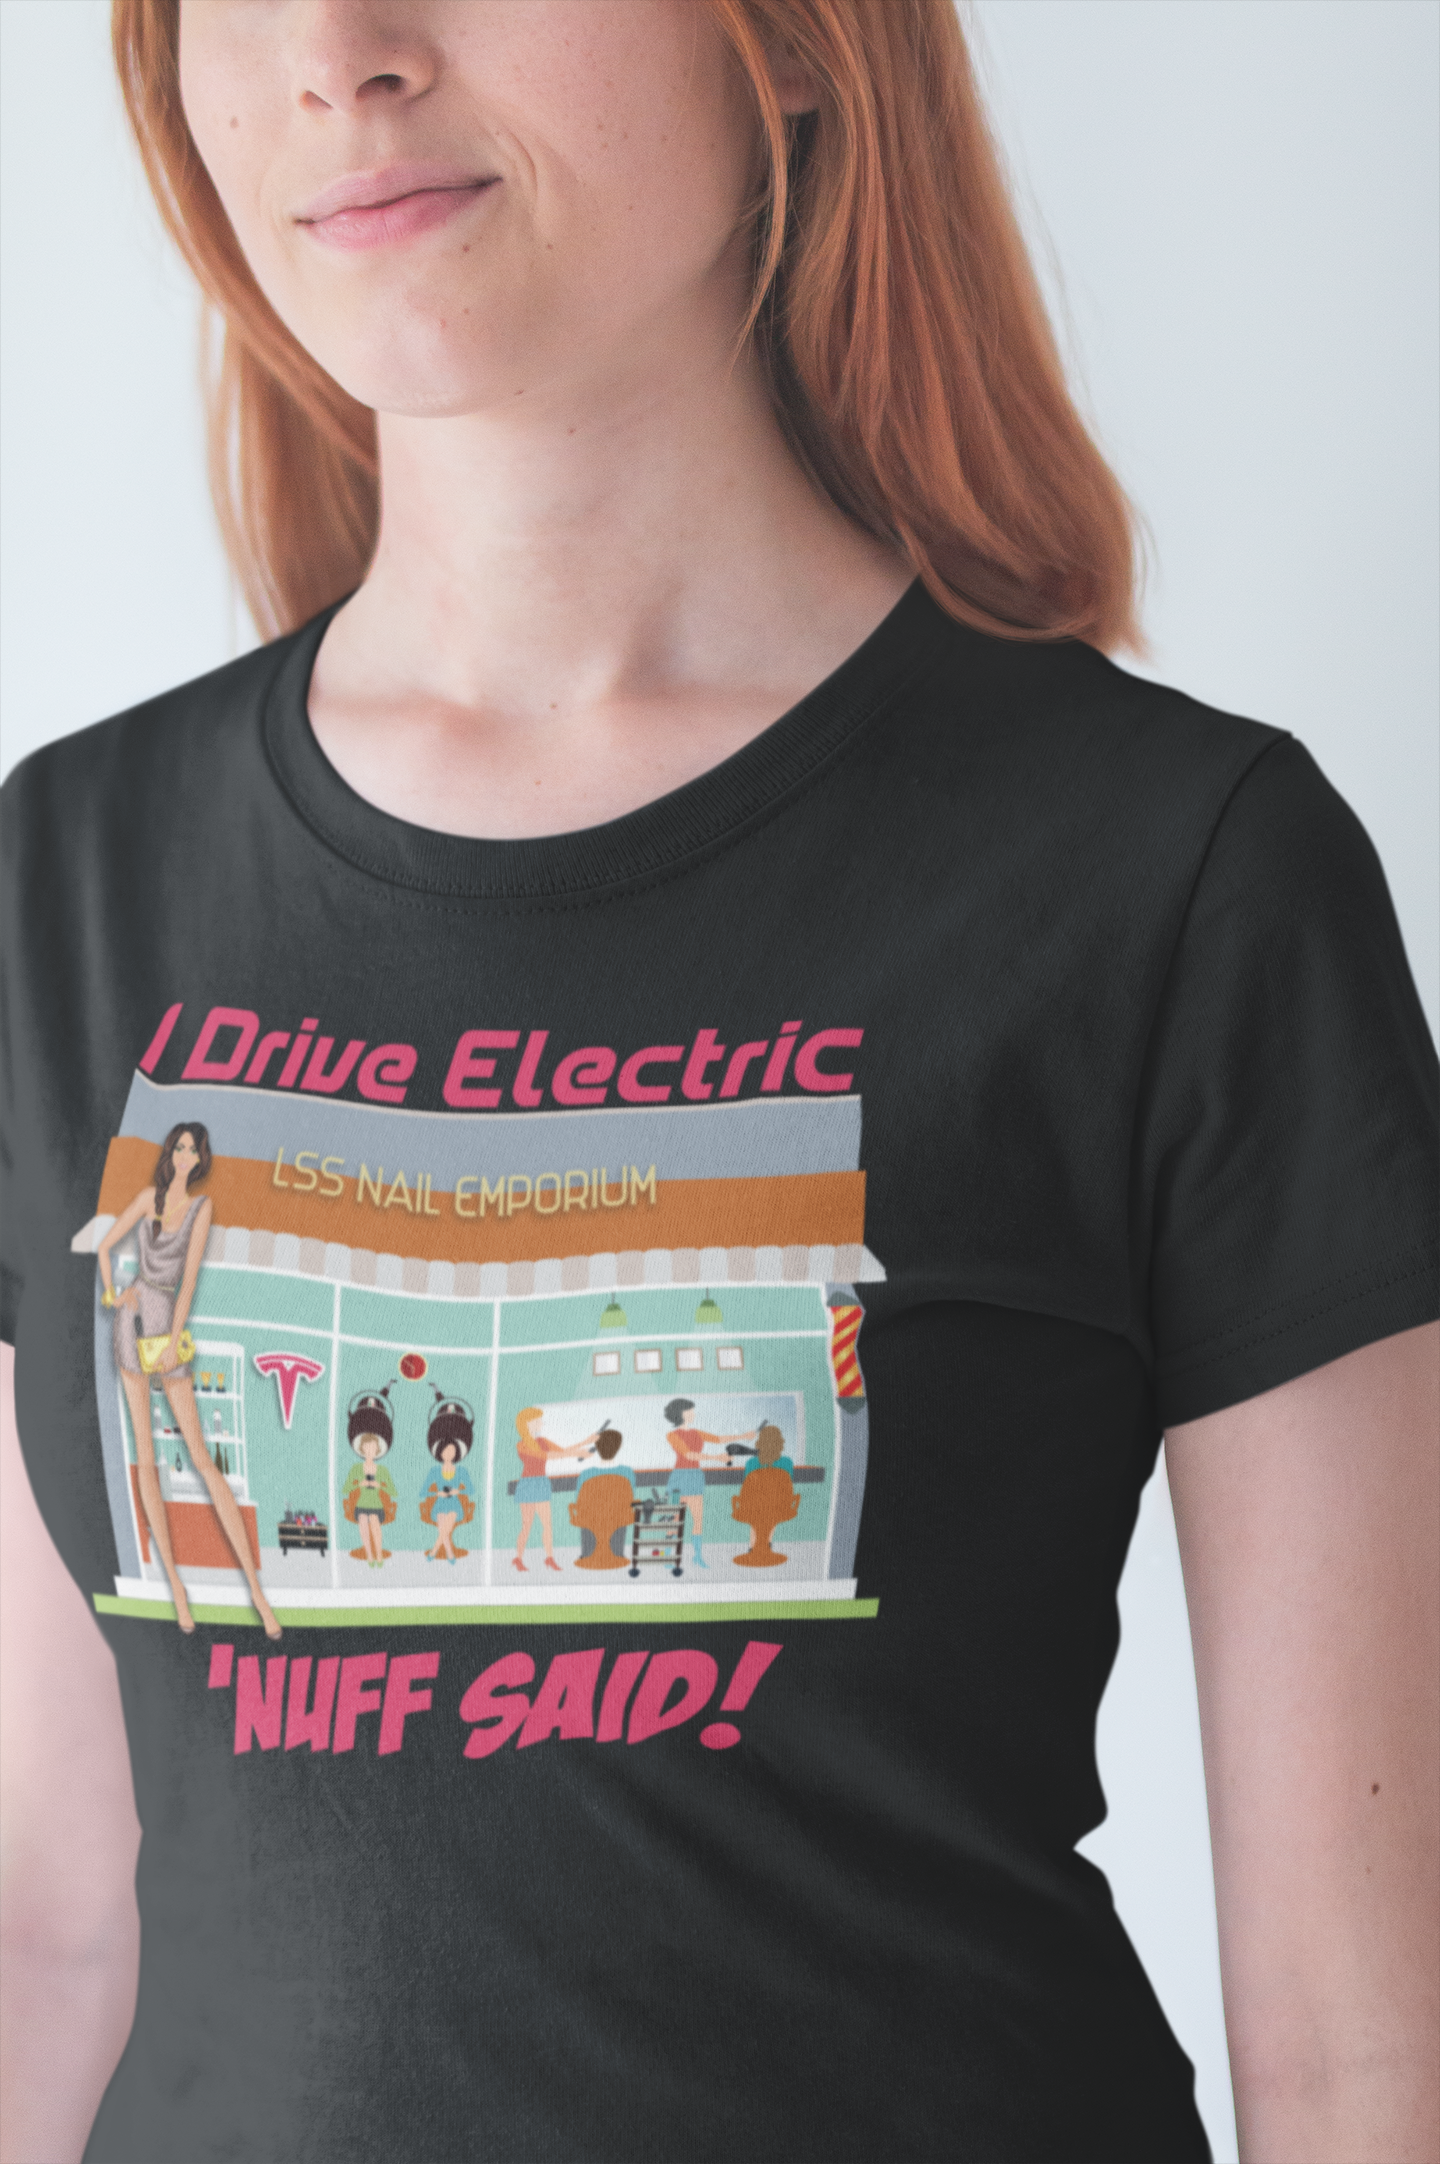 Woman wearing a black t-shirt that has a Salon-scene graphic design and says "I Drive Electric 'NUFF SAID!"